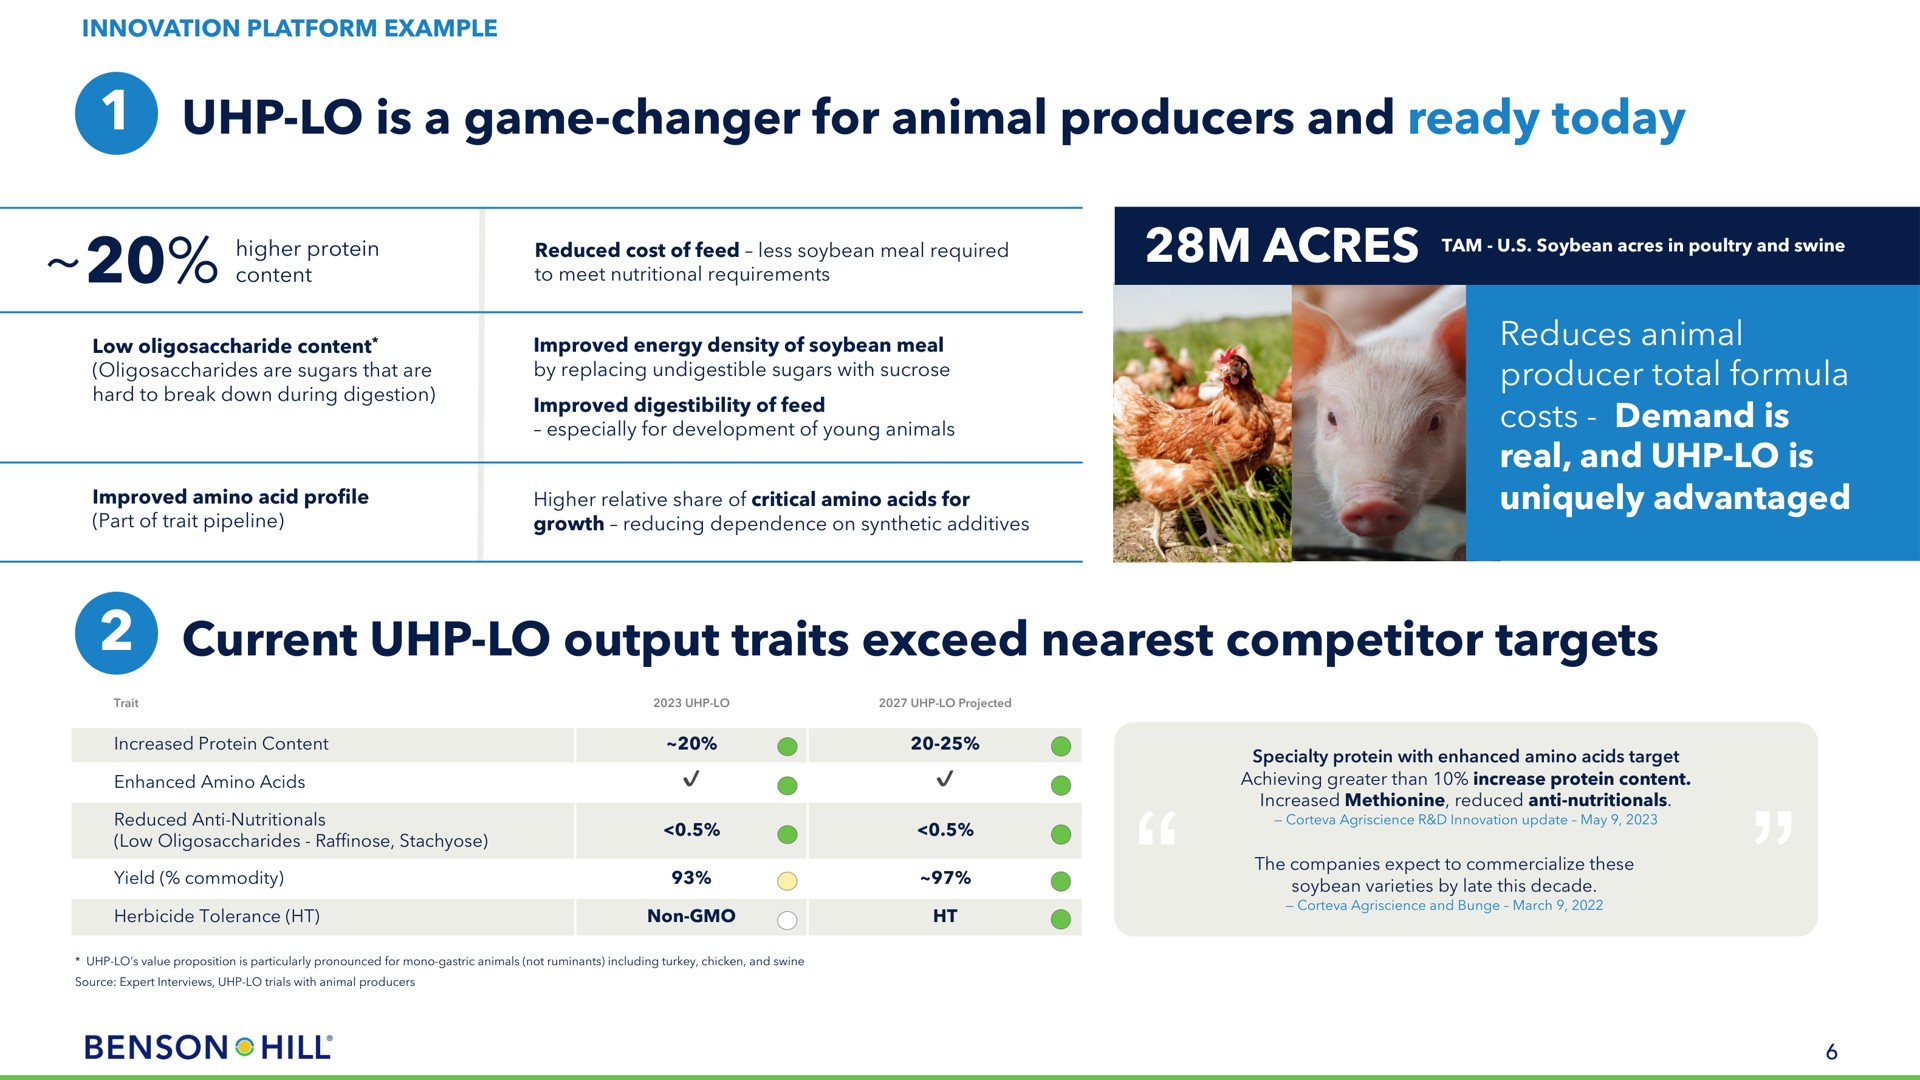 is a game changer for animal producers and ready today acres reduces animal producer total formula costs demand is real and is uniquely advantaged current output traits exceed nearest competitor targets content hill | Benson Hill